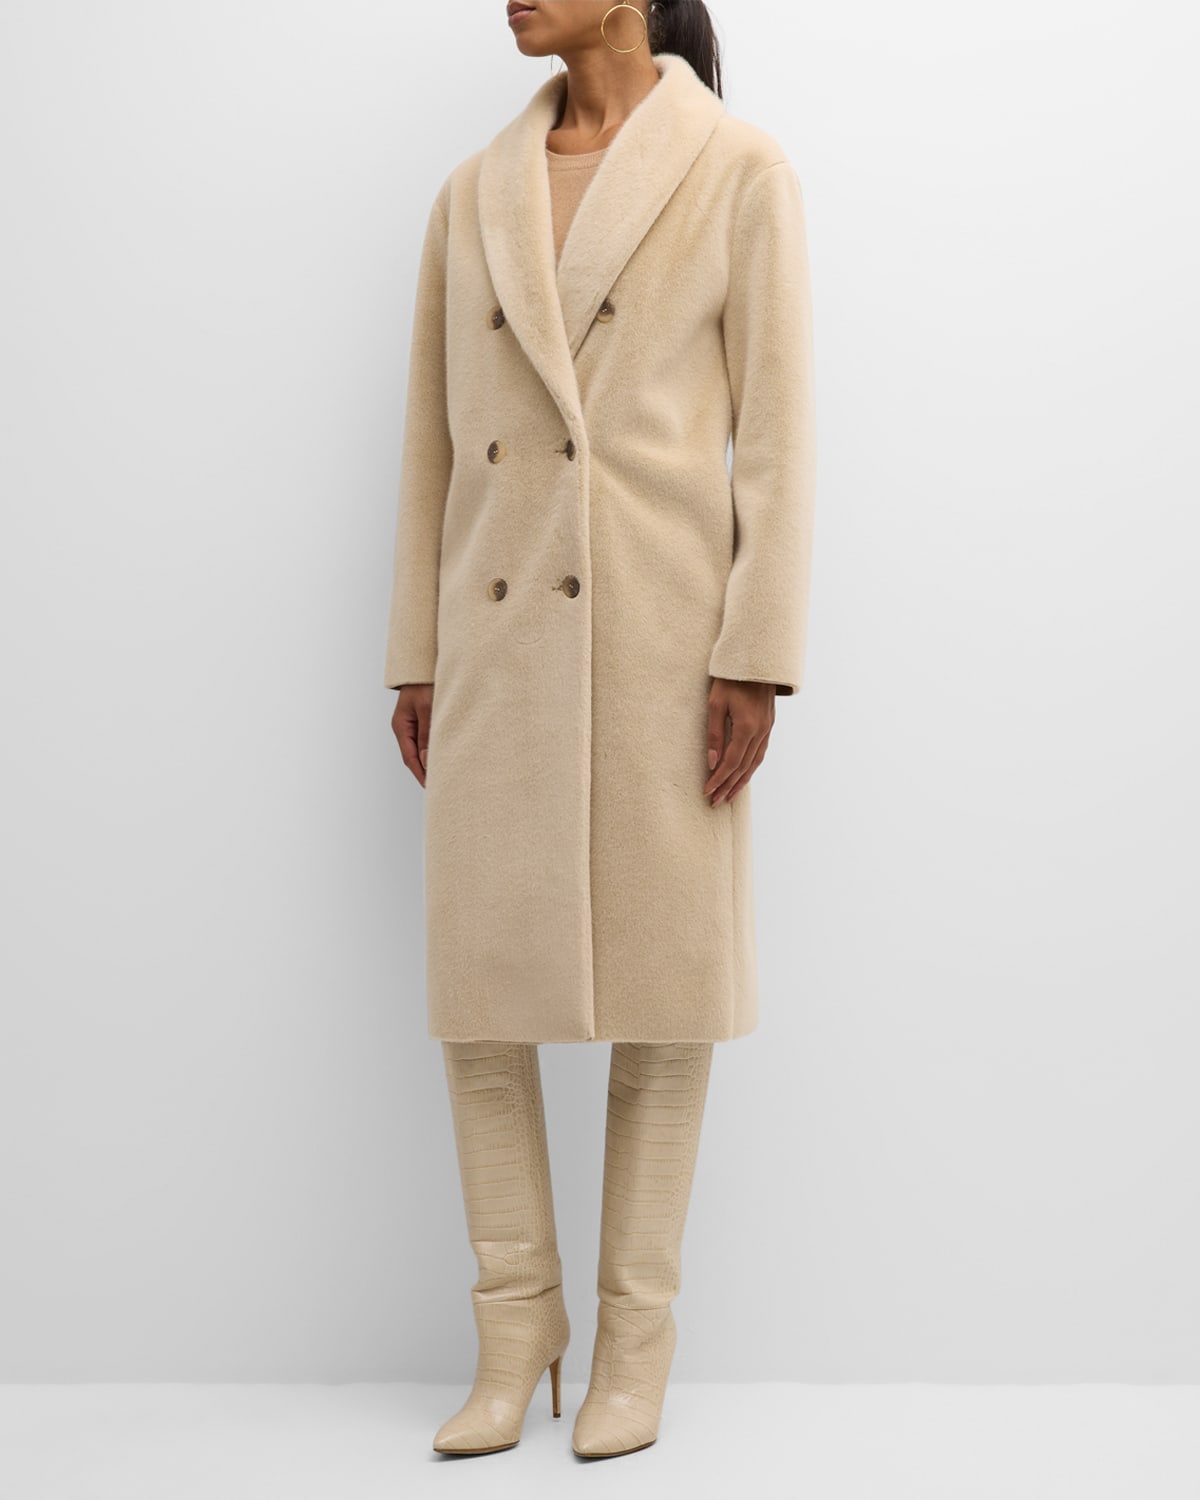 Elie Tahari The Dolli Double-Breasted Suede Coat